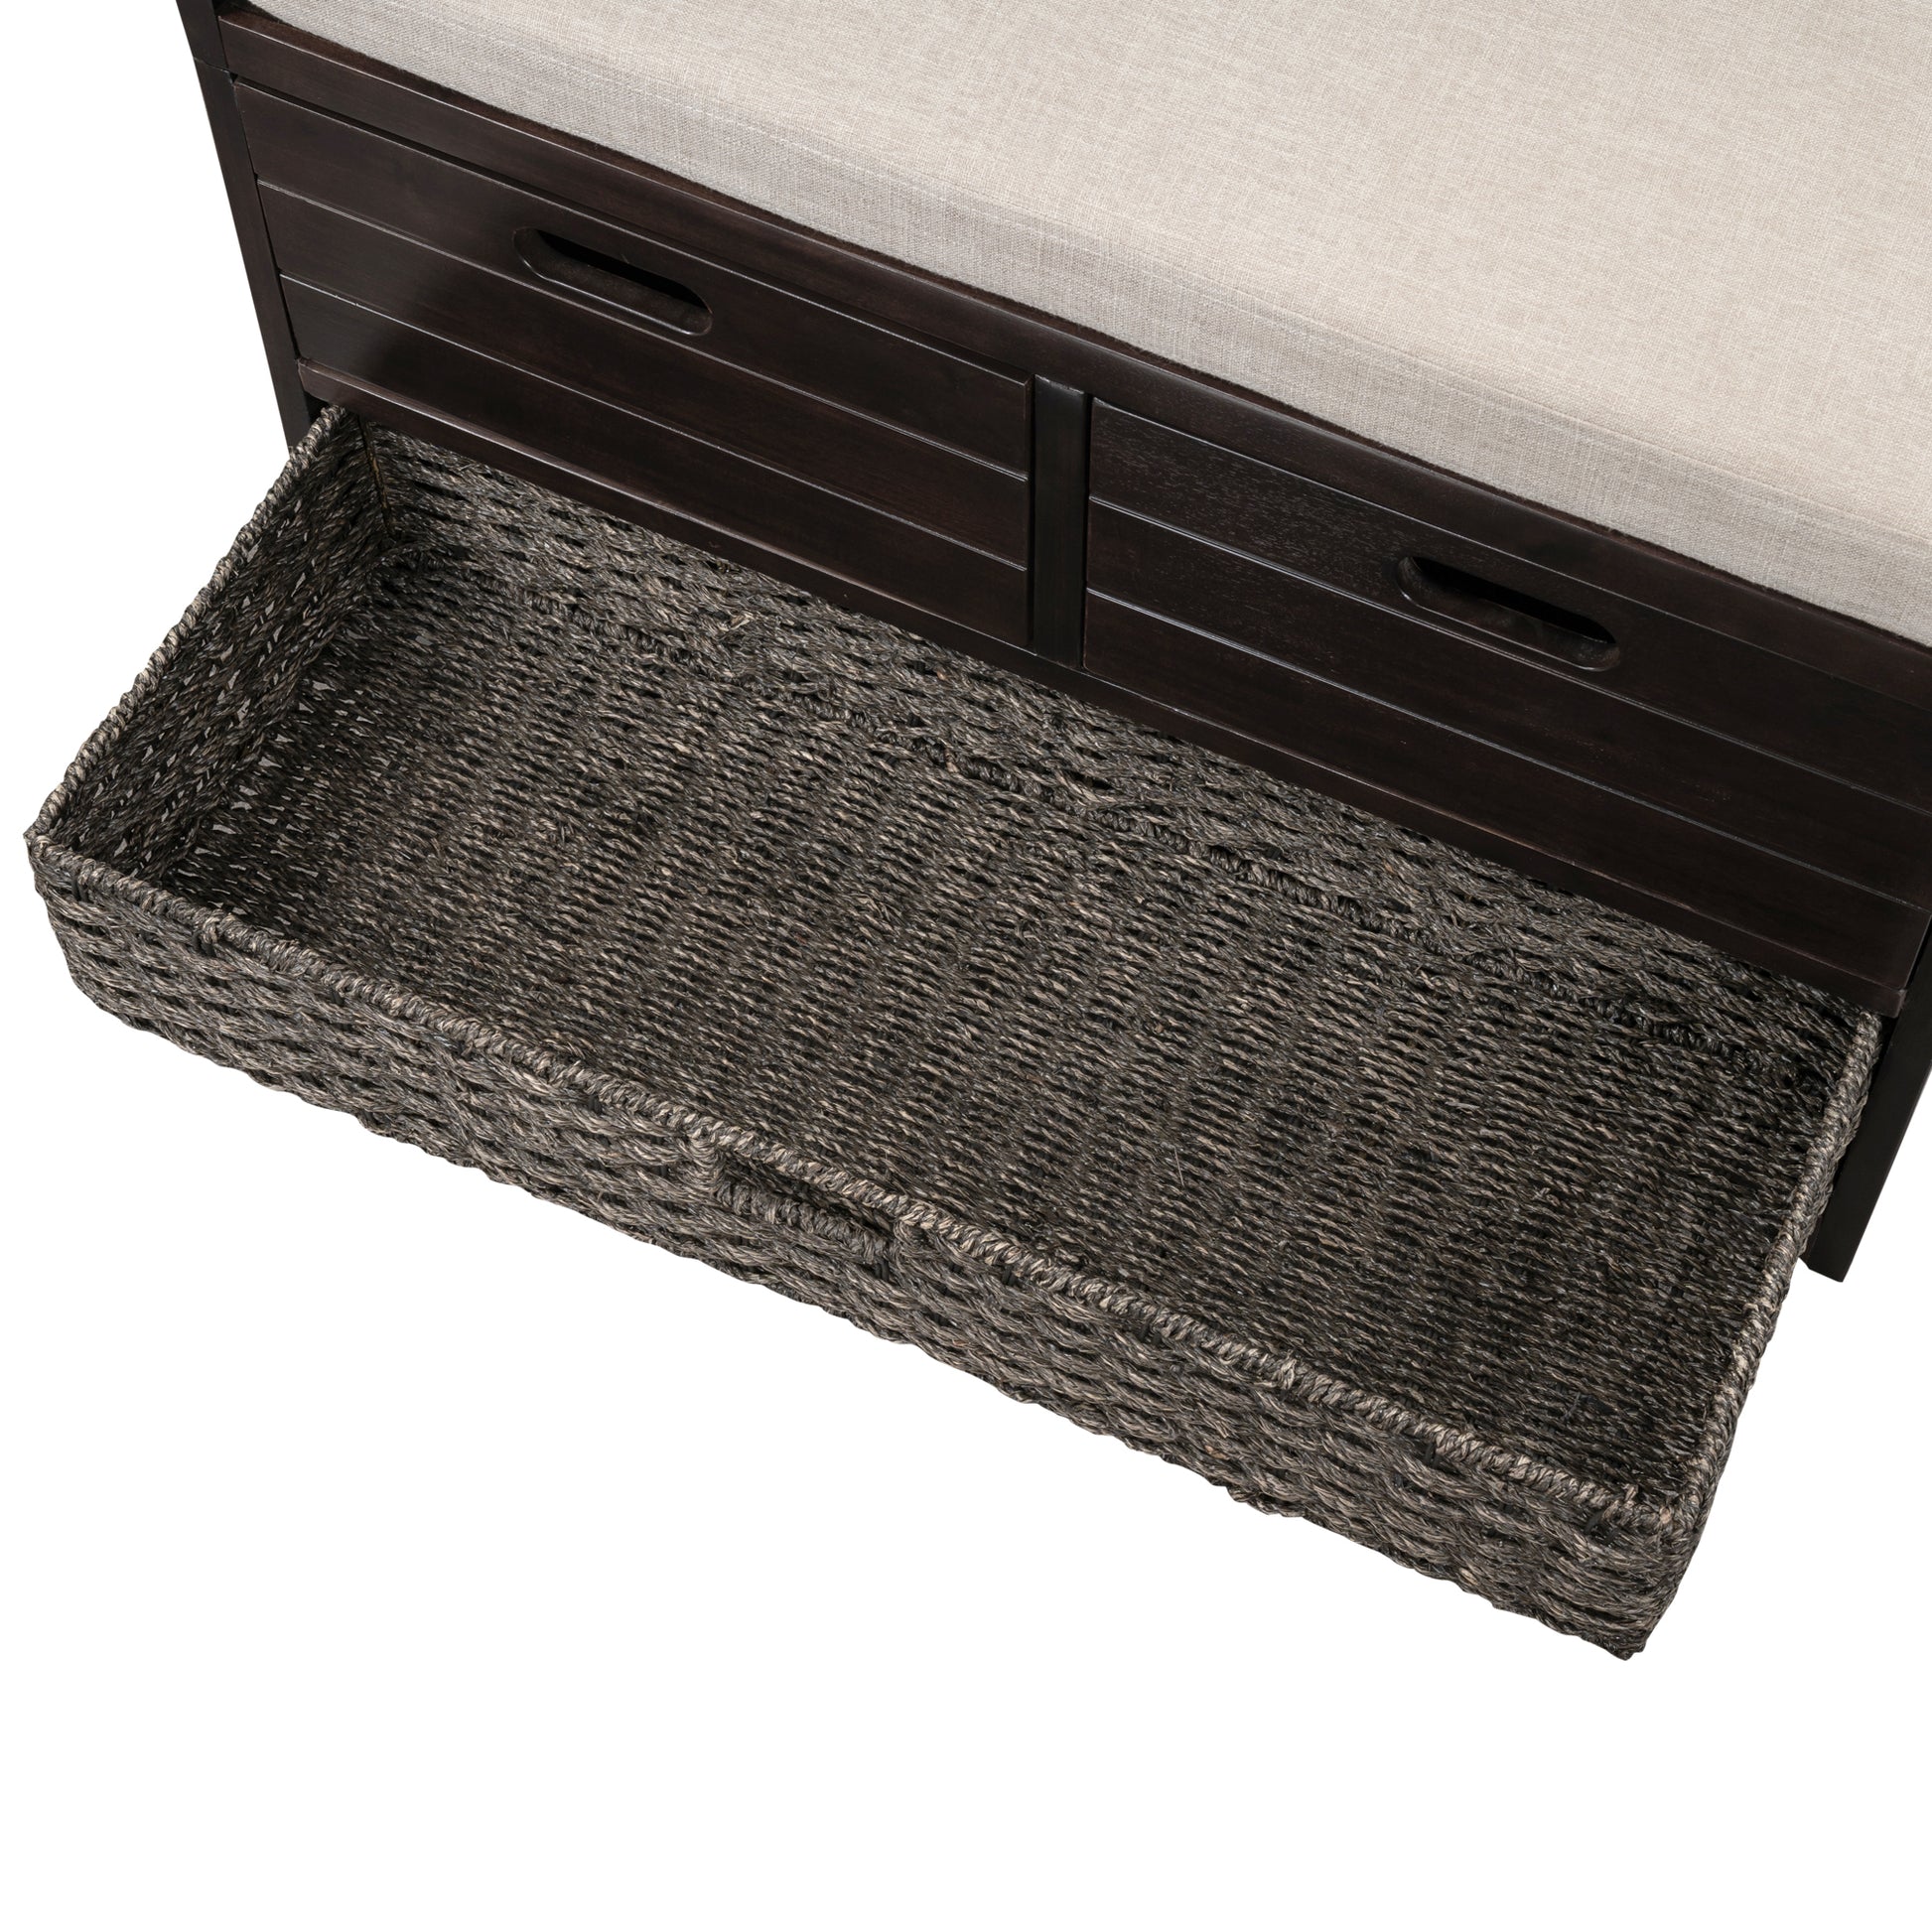 TREXM Storage Bench with Removable Basket and 2 Drawers - Espresso